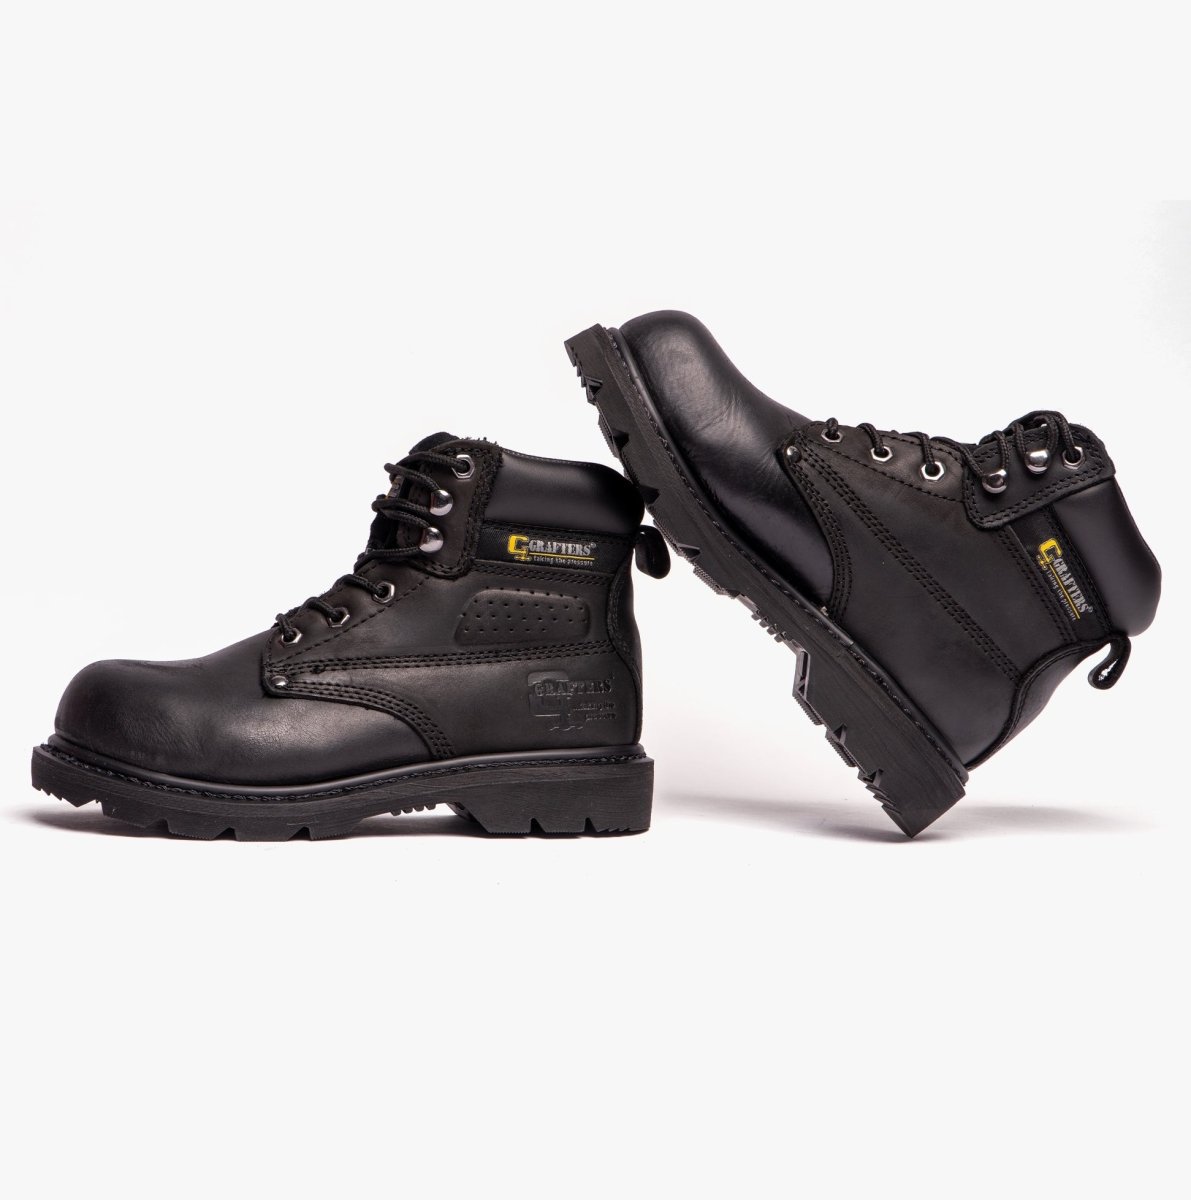 Grafters GLADIATOR Unisex Leather Safety Boots Black M538A - 3 | STB.co.uk